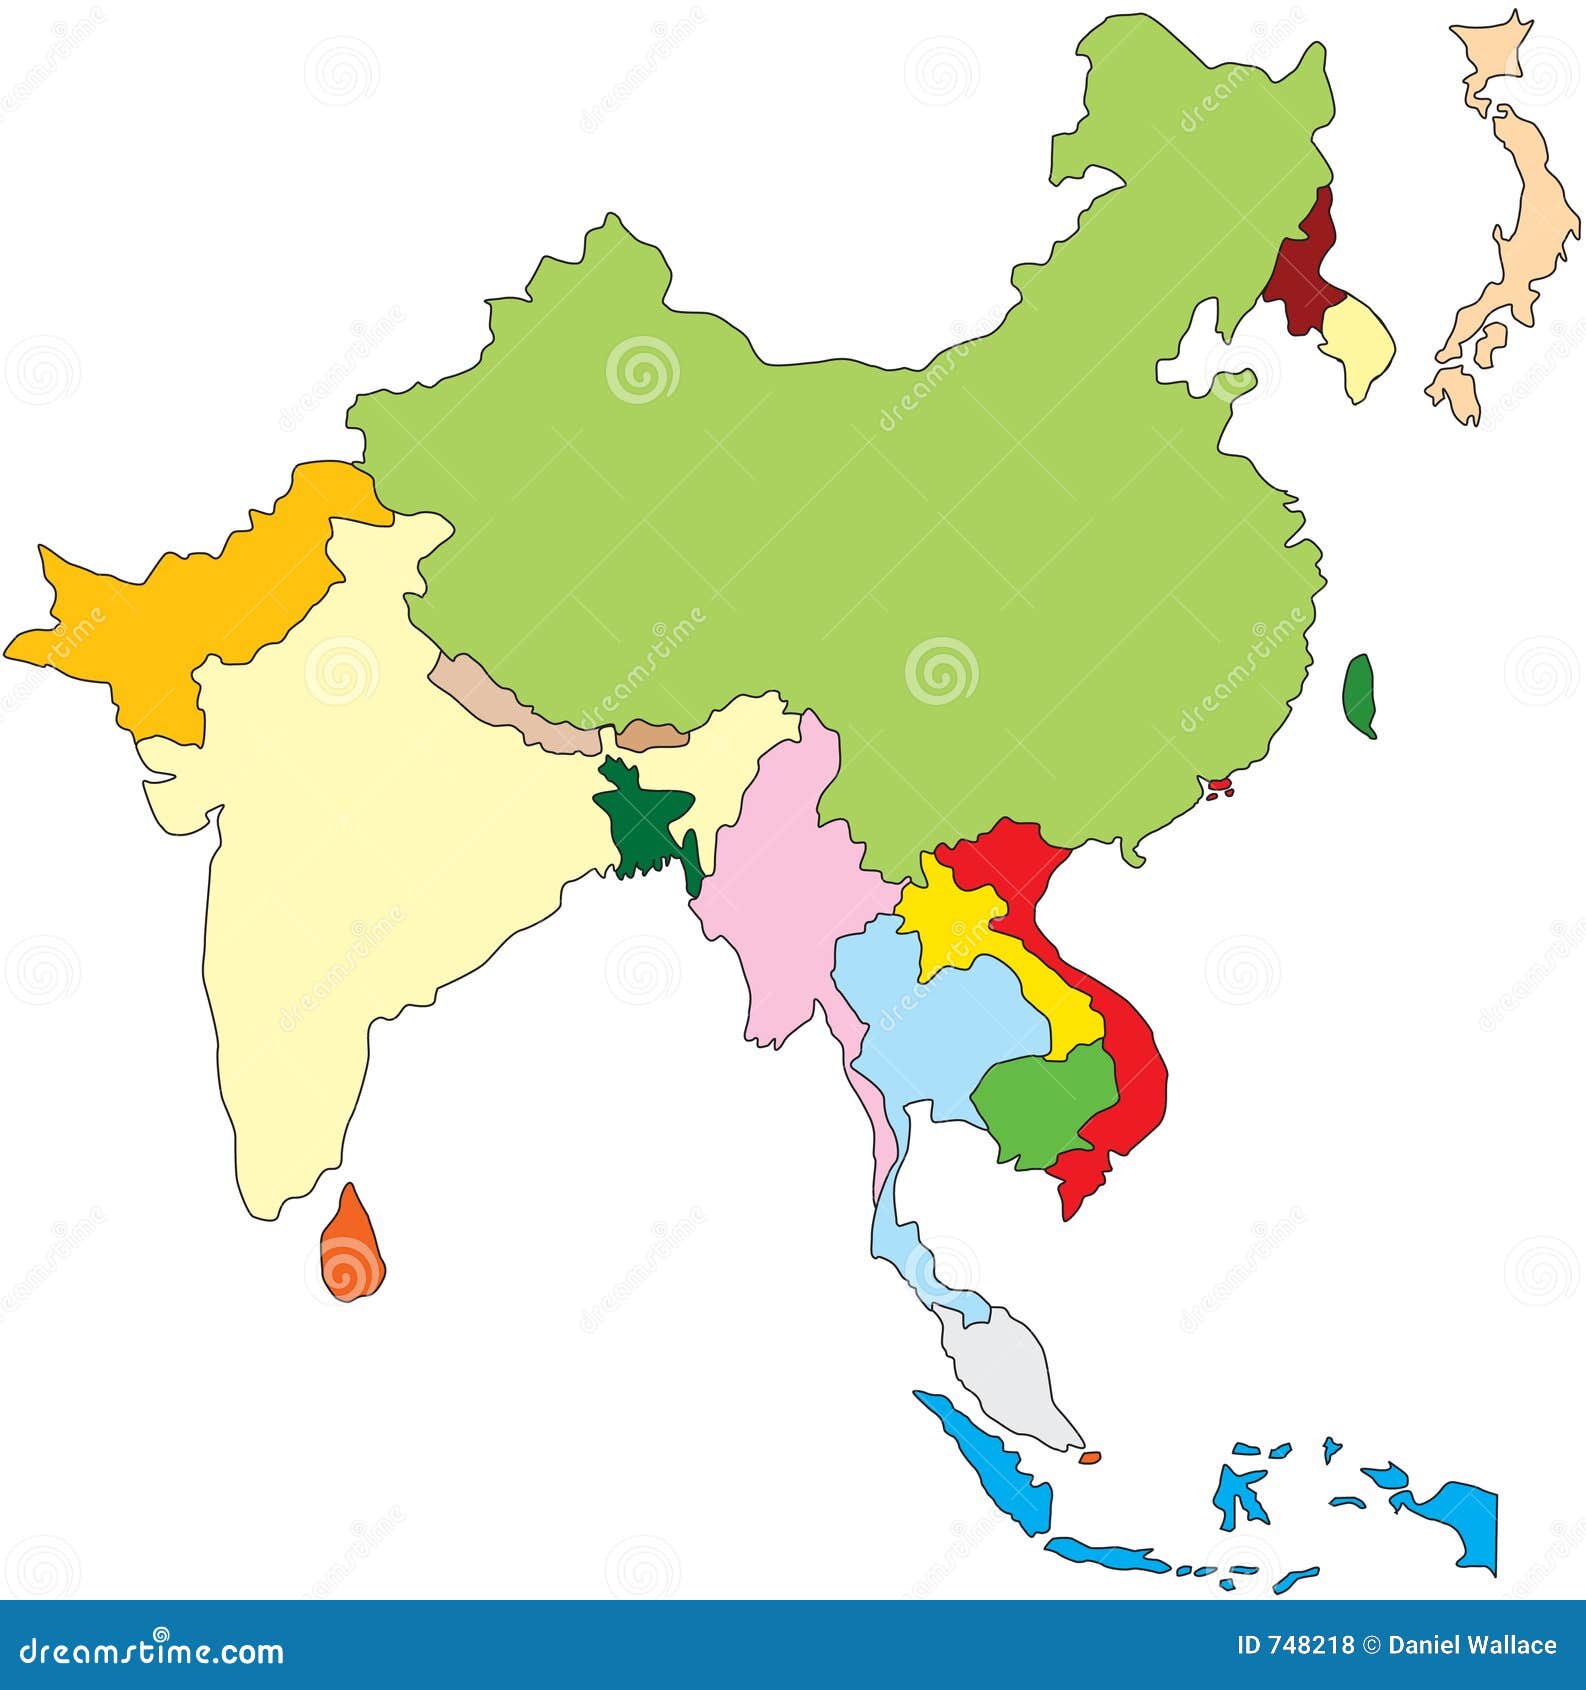 clipart map of asia - photo #16